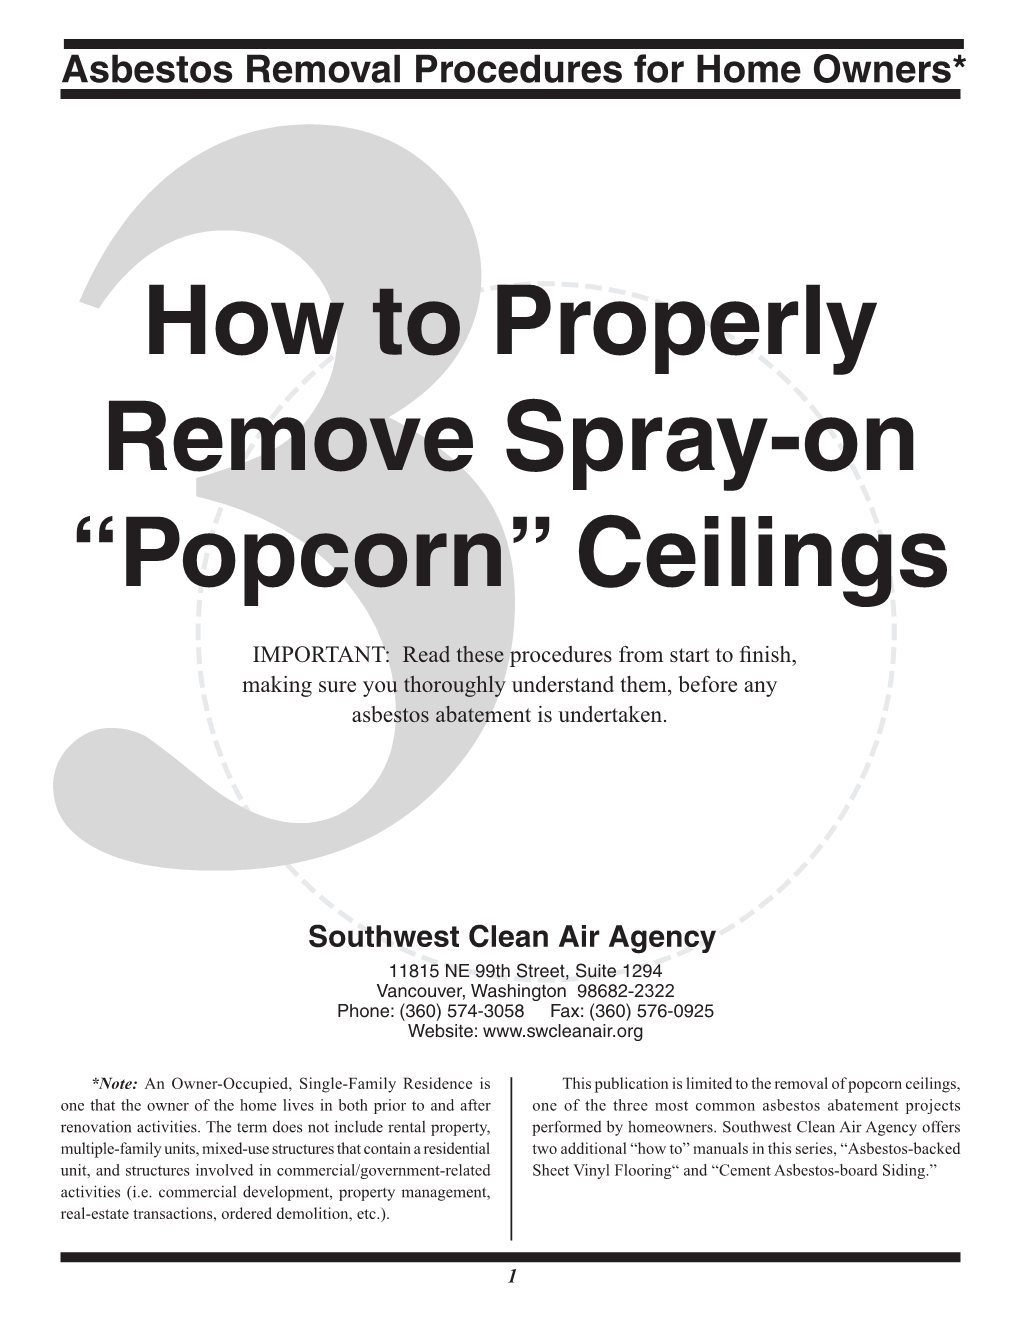 How to Properly Remove Spray-On “Popcorn” Ceilings